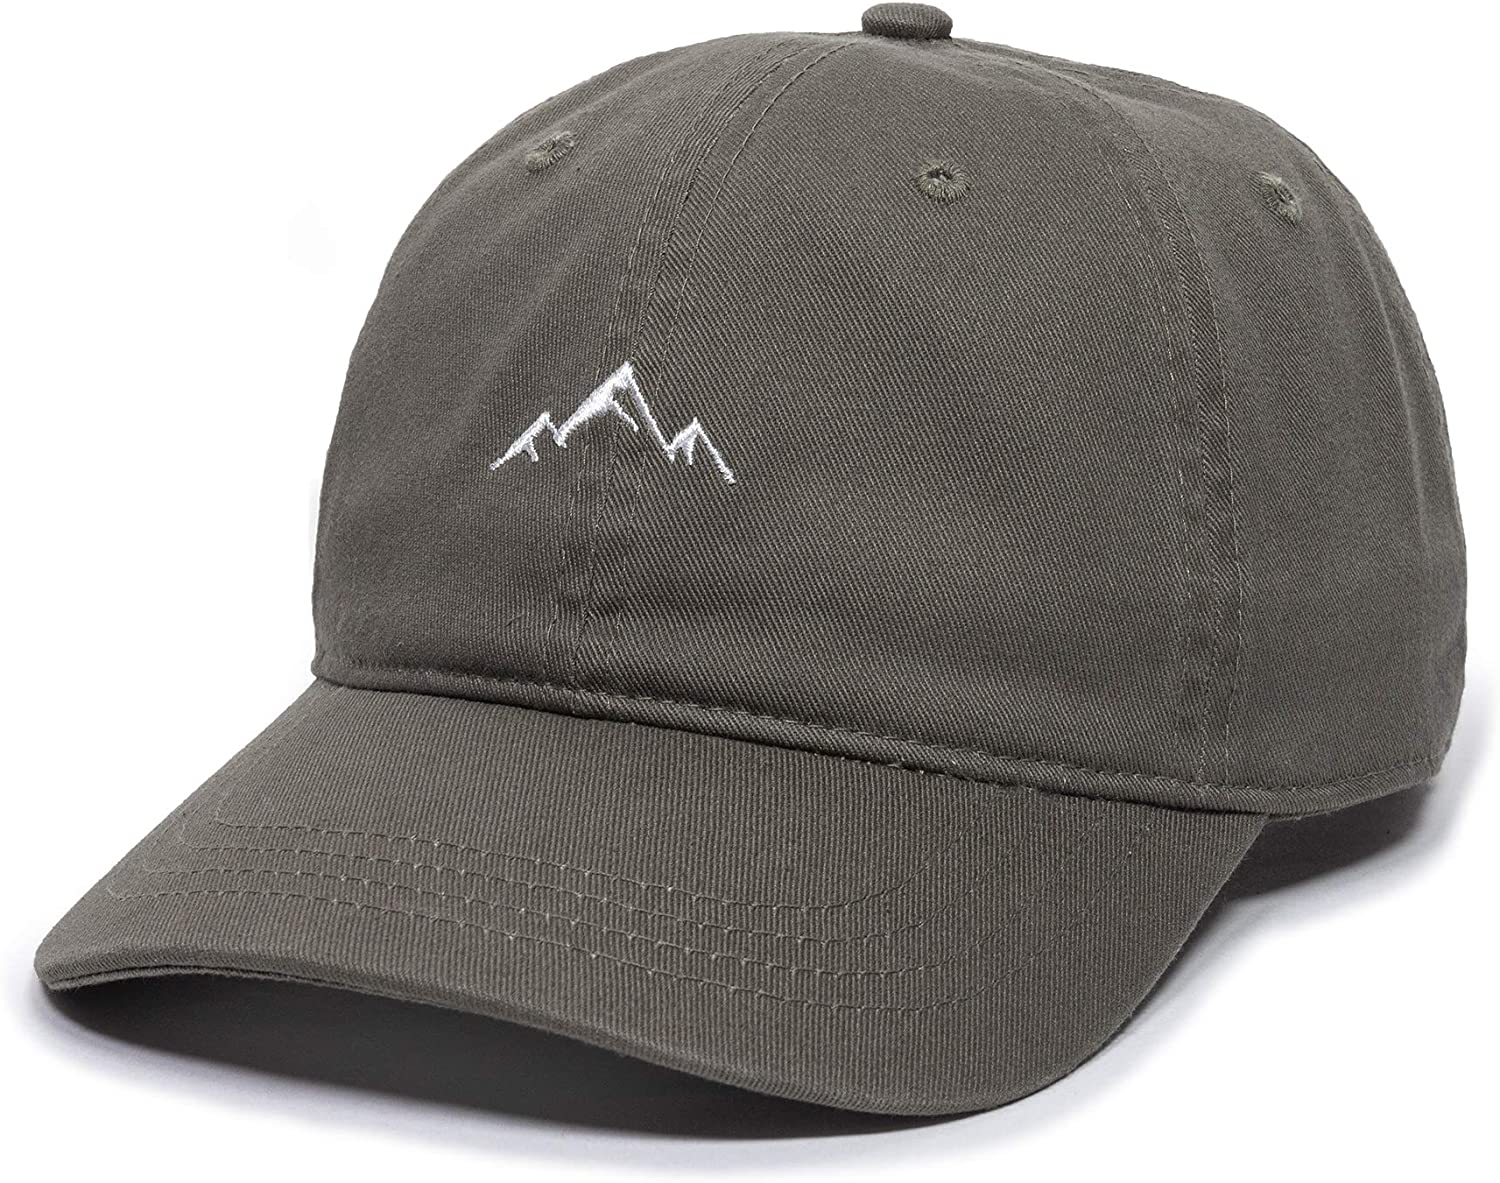 Outdoor Cap Mountain Dad Hat - Unstructured Soft Cotton, Charcoal